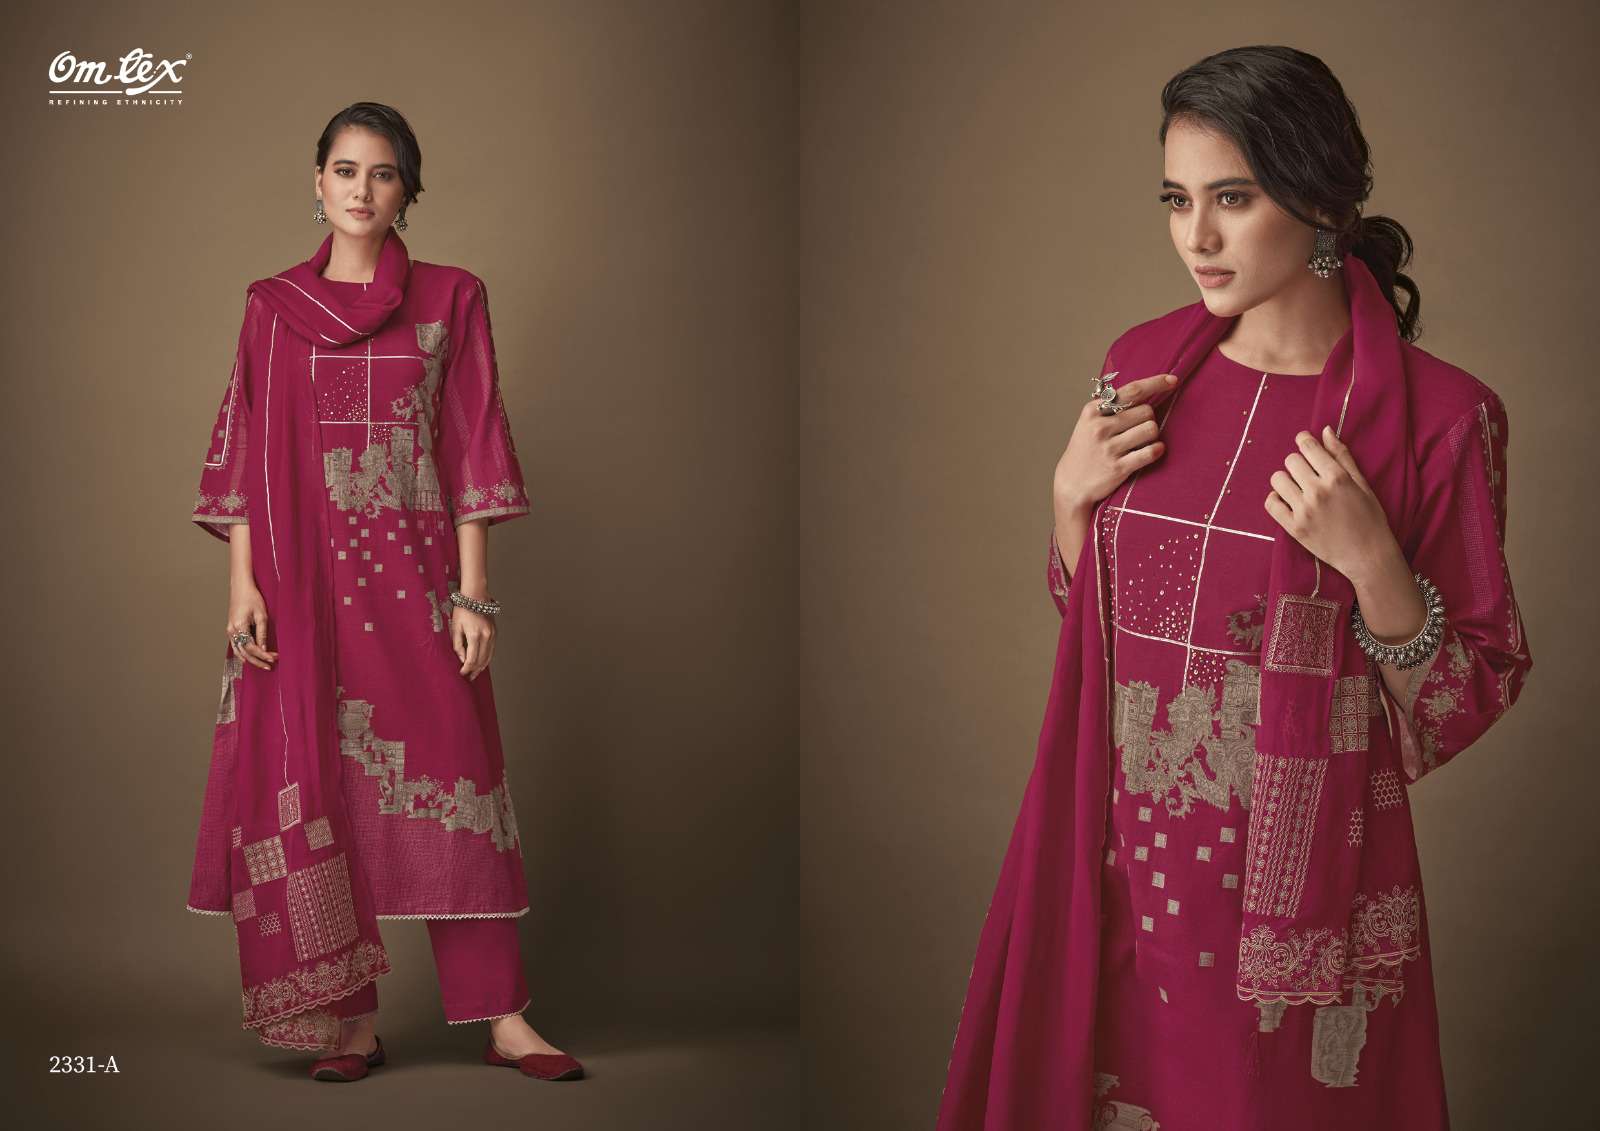 Kalpi Vol-2 By Om Tex 2331-A To 2331-D Series Beautiful Stylish Festive Suits Fancy Colorful Casual Wear & Ethnic Wear & Ready To Wear Cotton Linen Dresses At Wholesale Price